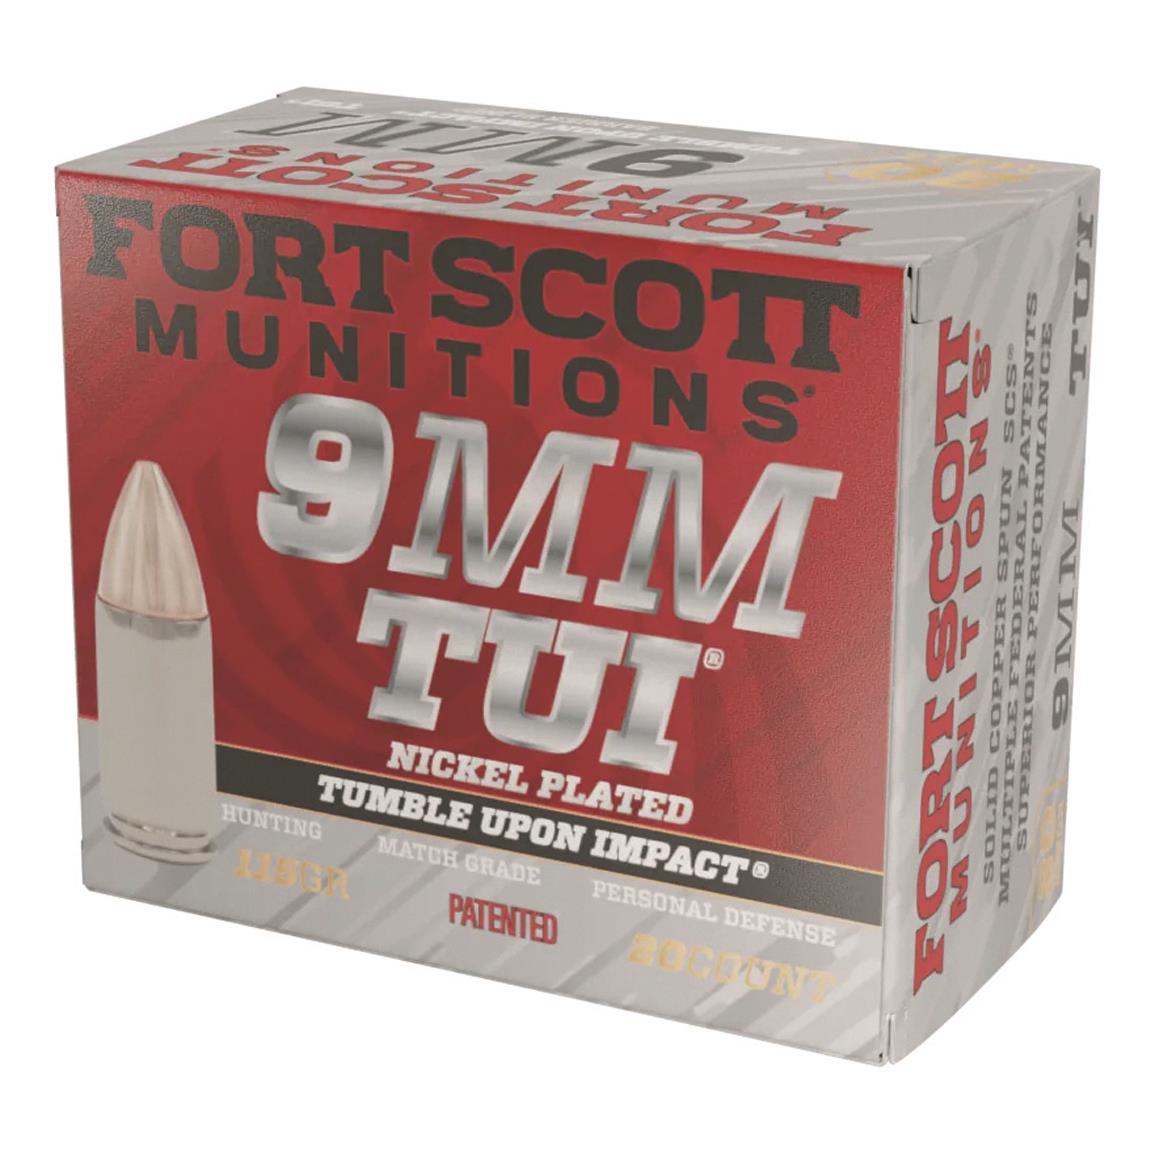 Fort Scott Tumble Upon Impact Nickel-Plated Ammo, 9mm, SCS, 115 Grain, 20 Rounds